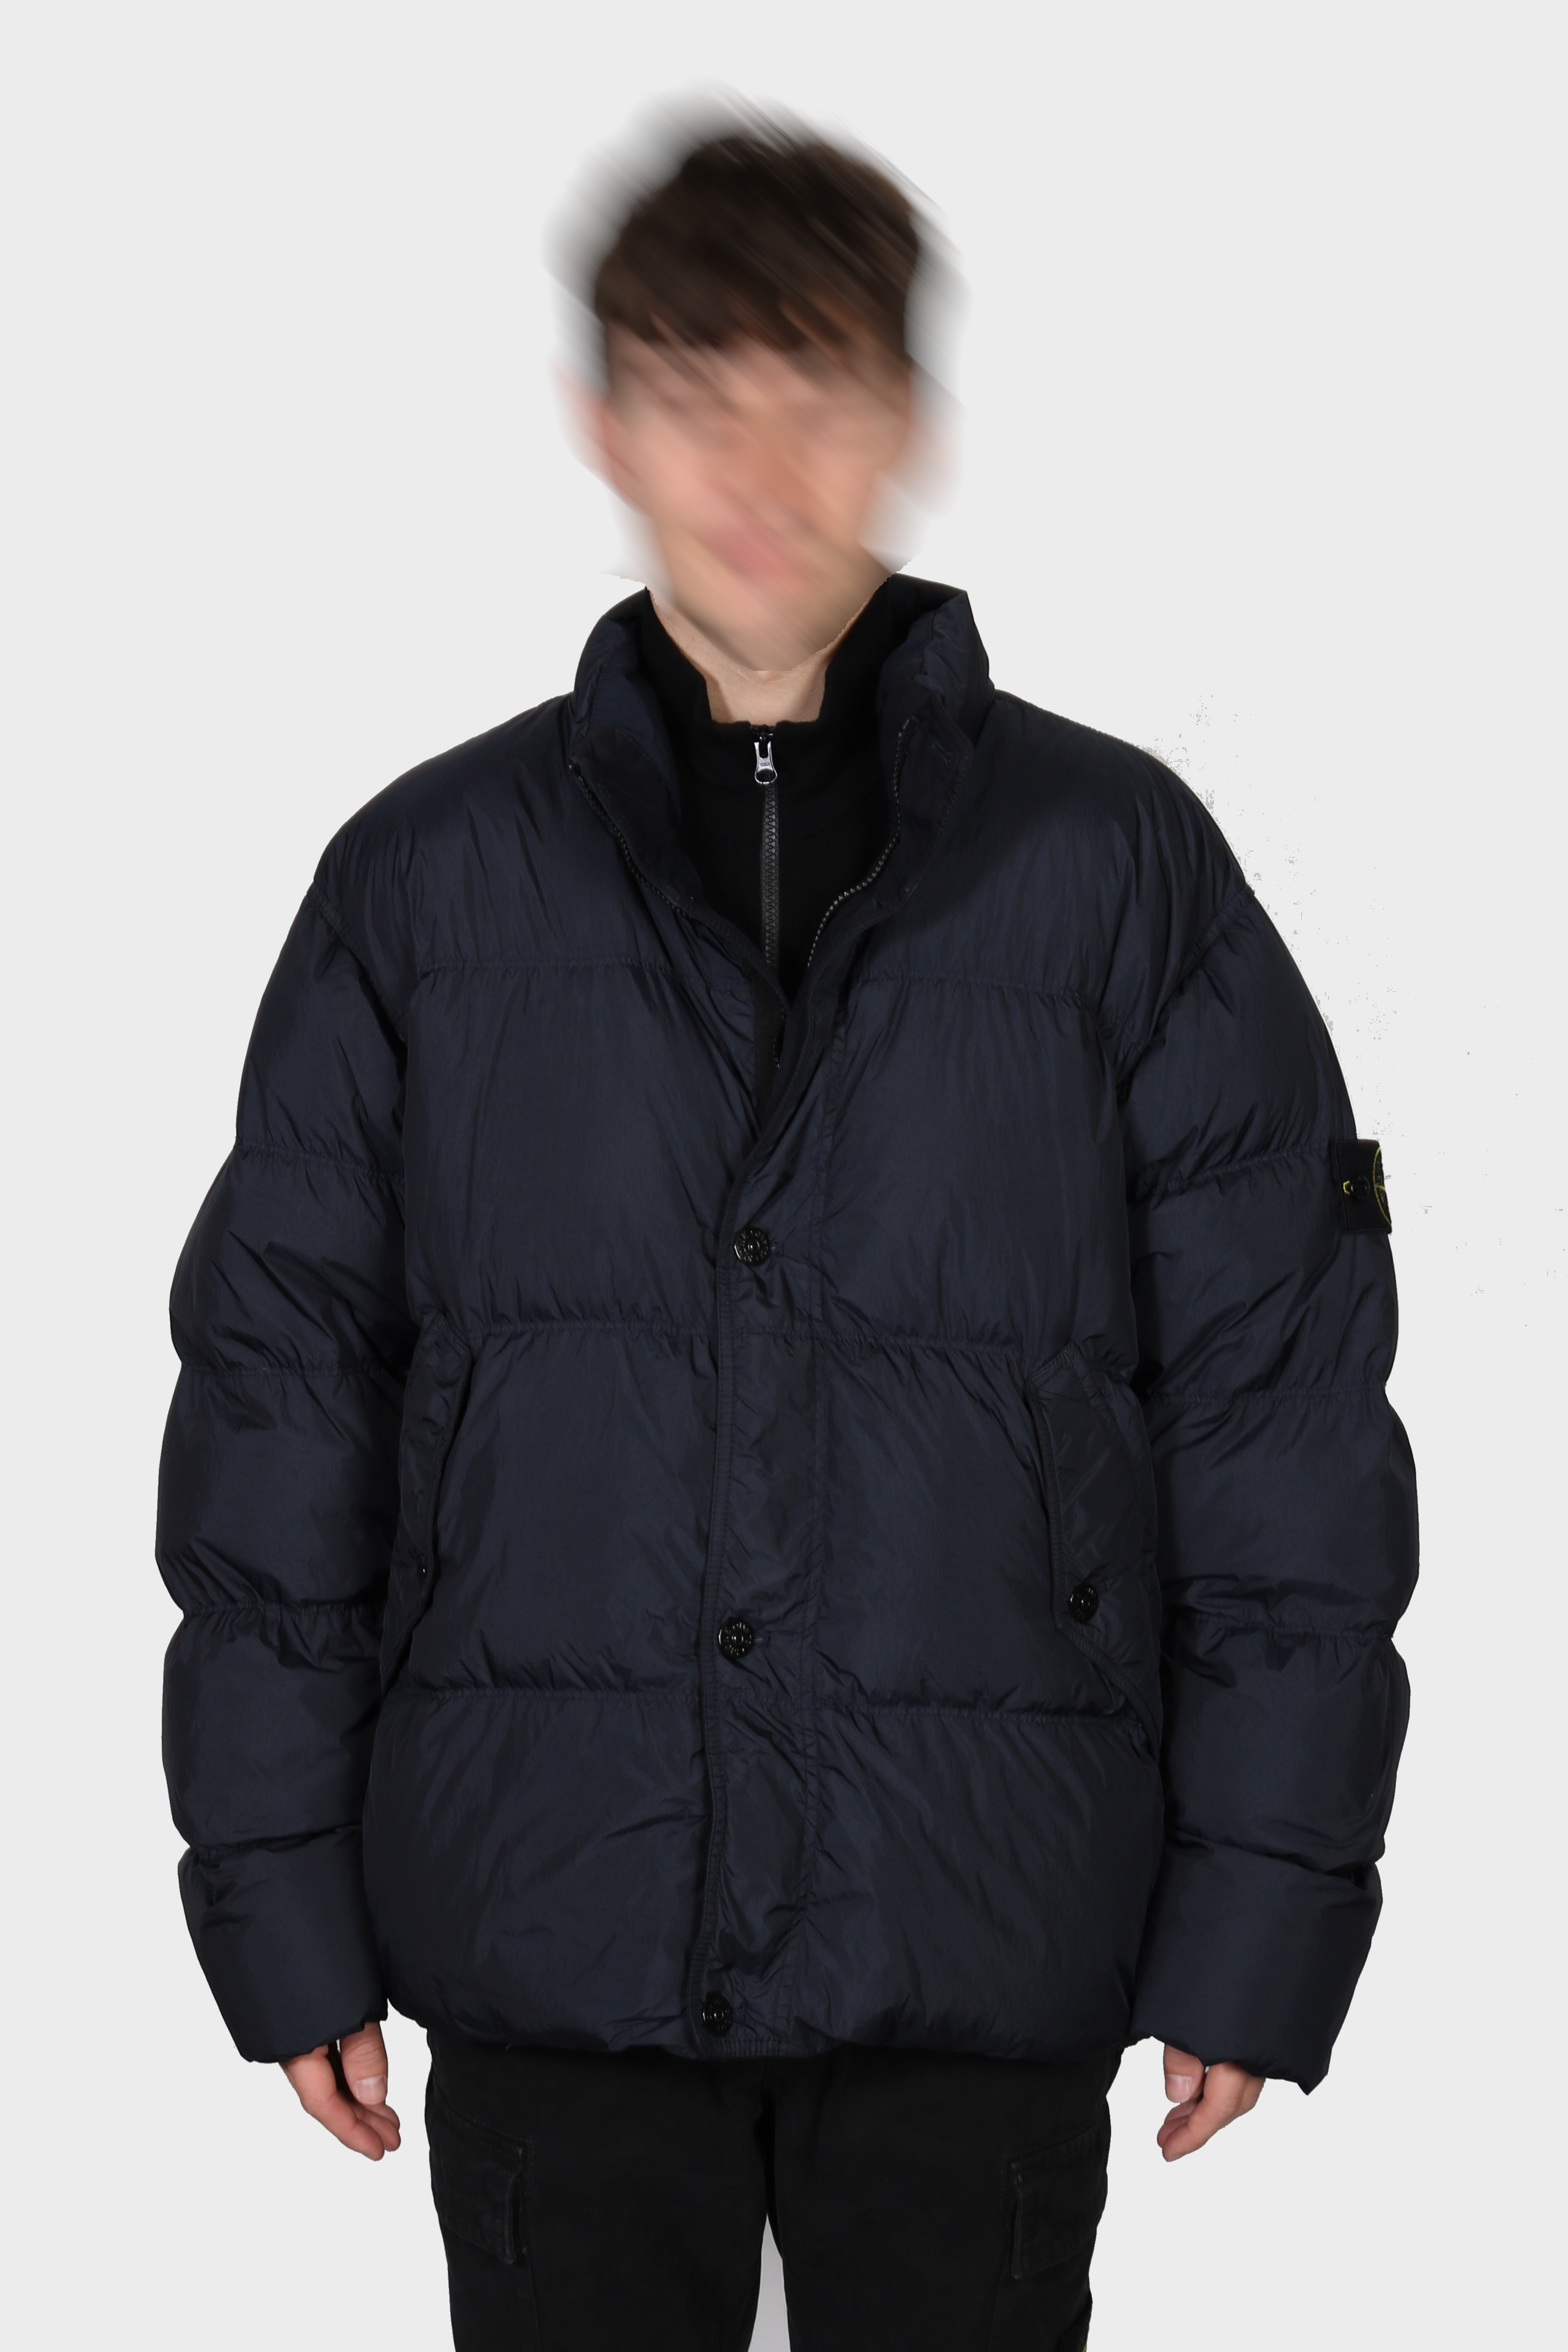 STONE ISLAND Garment Dyed Crinkle Reps Down Jacket in Navy